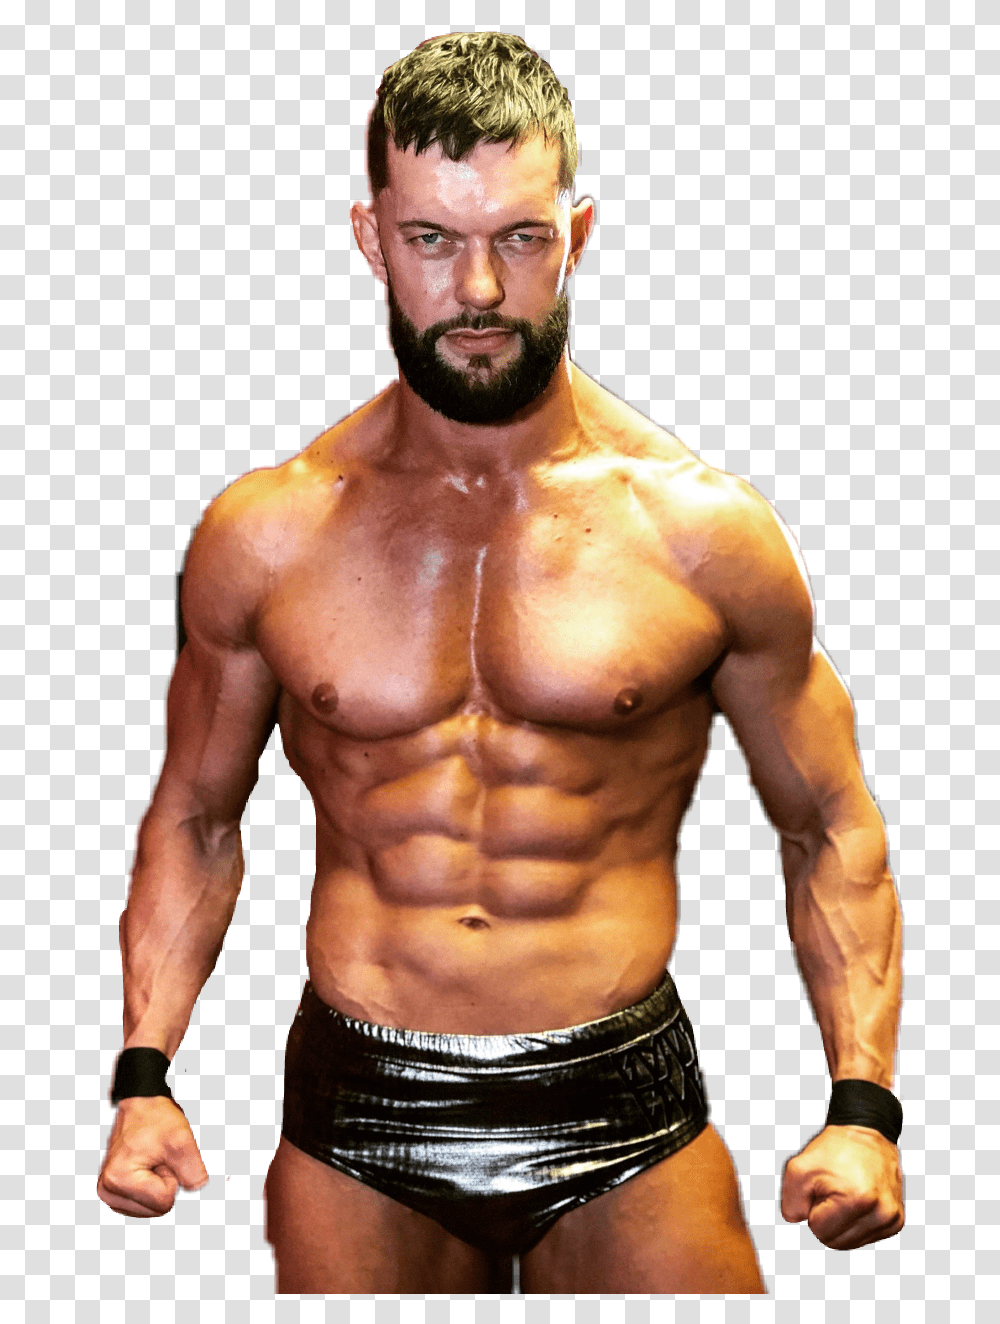 Wwe Download Finn Balor Abs 2019, Person, Human, Face, Working Out Transparent Png